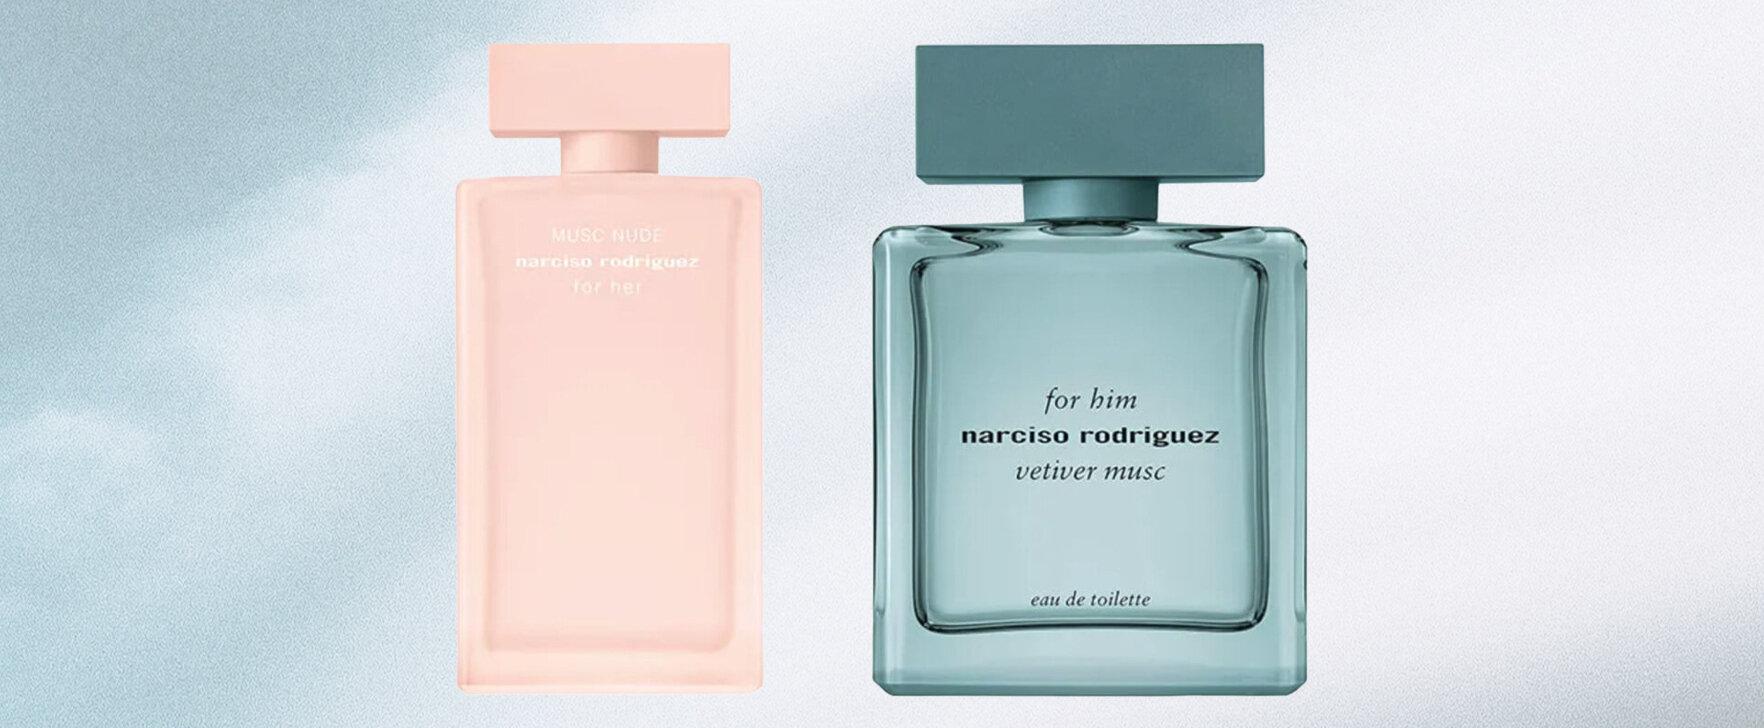 Natural Sensuality: For Her Musc Nude and For Him Vetiver Musc by Narciso Rodriguez